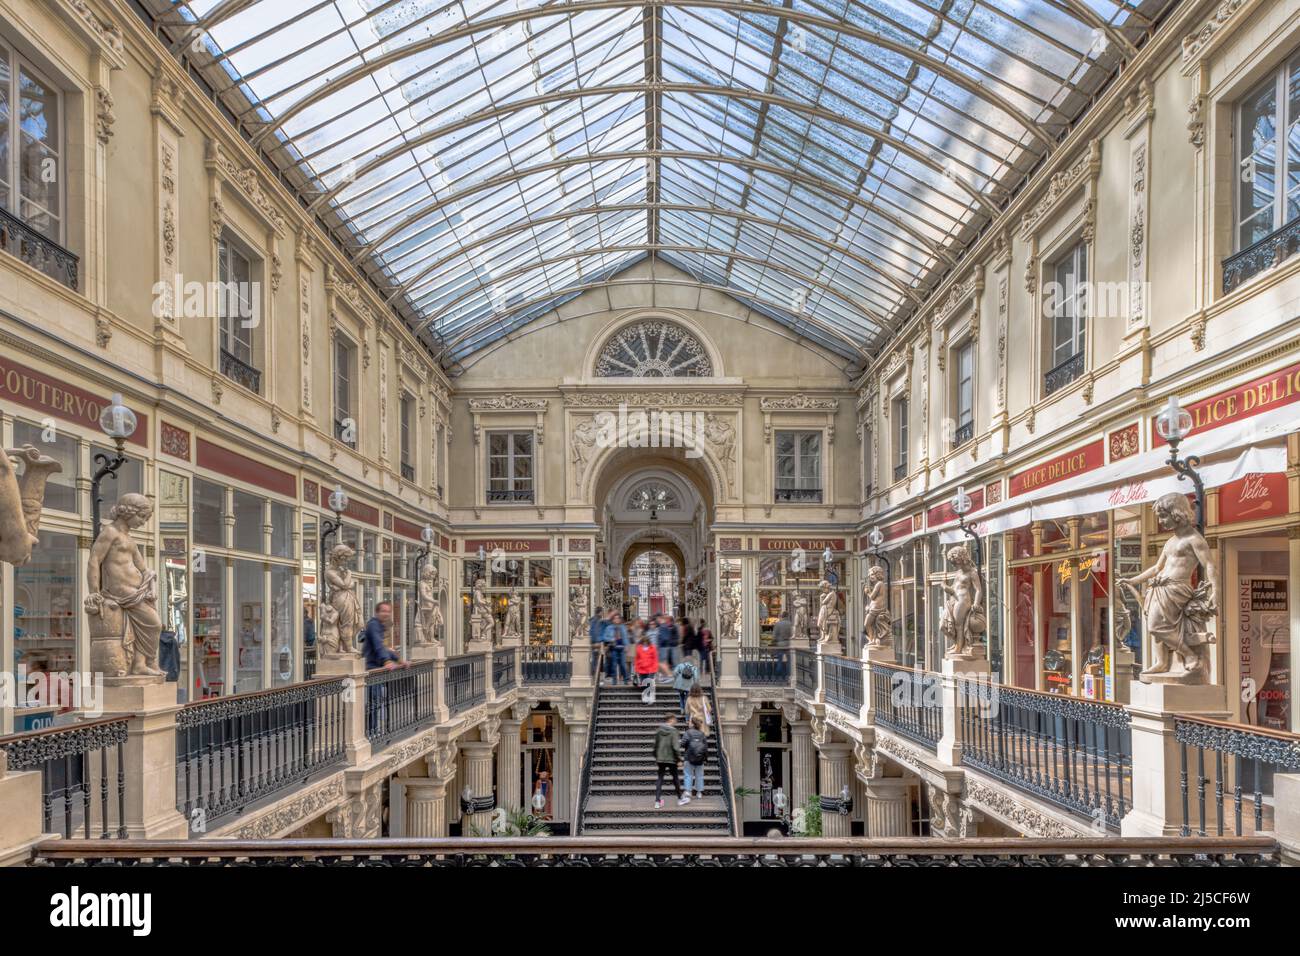 The Passage de la Pommeraye is a famous place in Nantes. It is a shopping arcade built in the 19th century Stock Photo